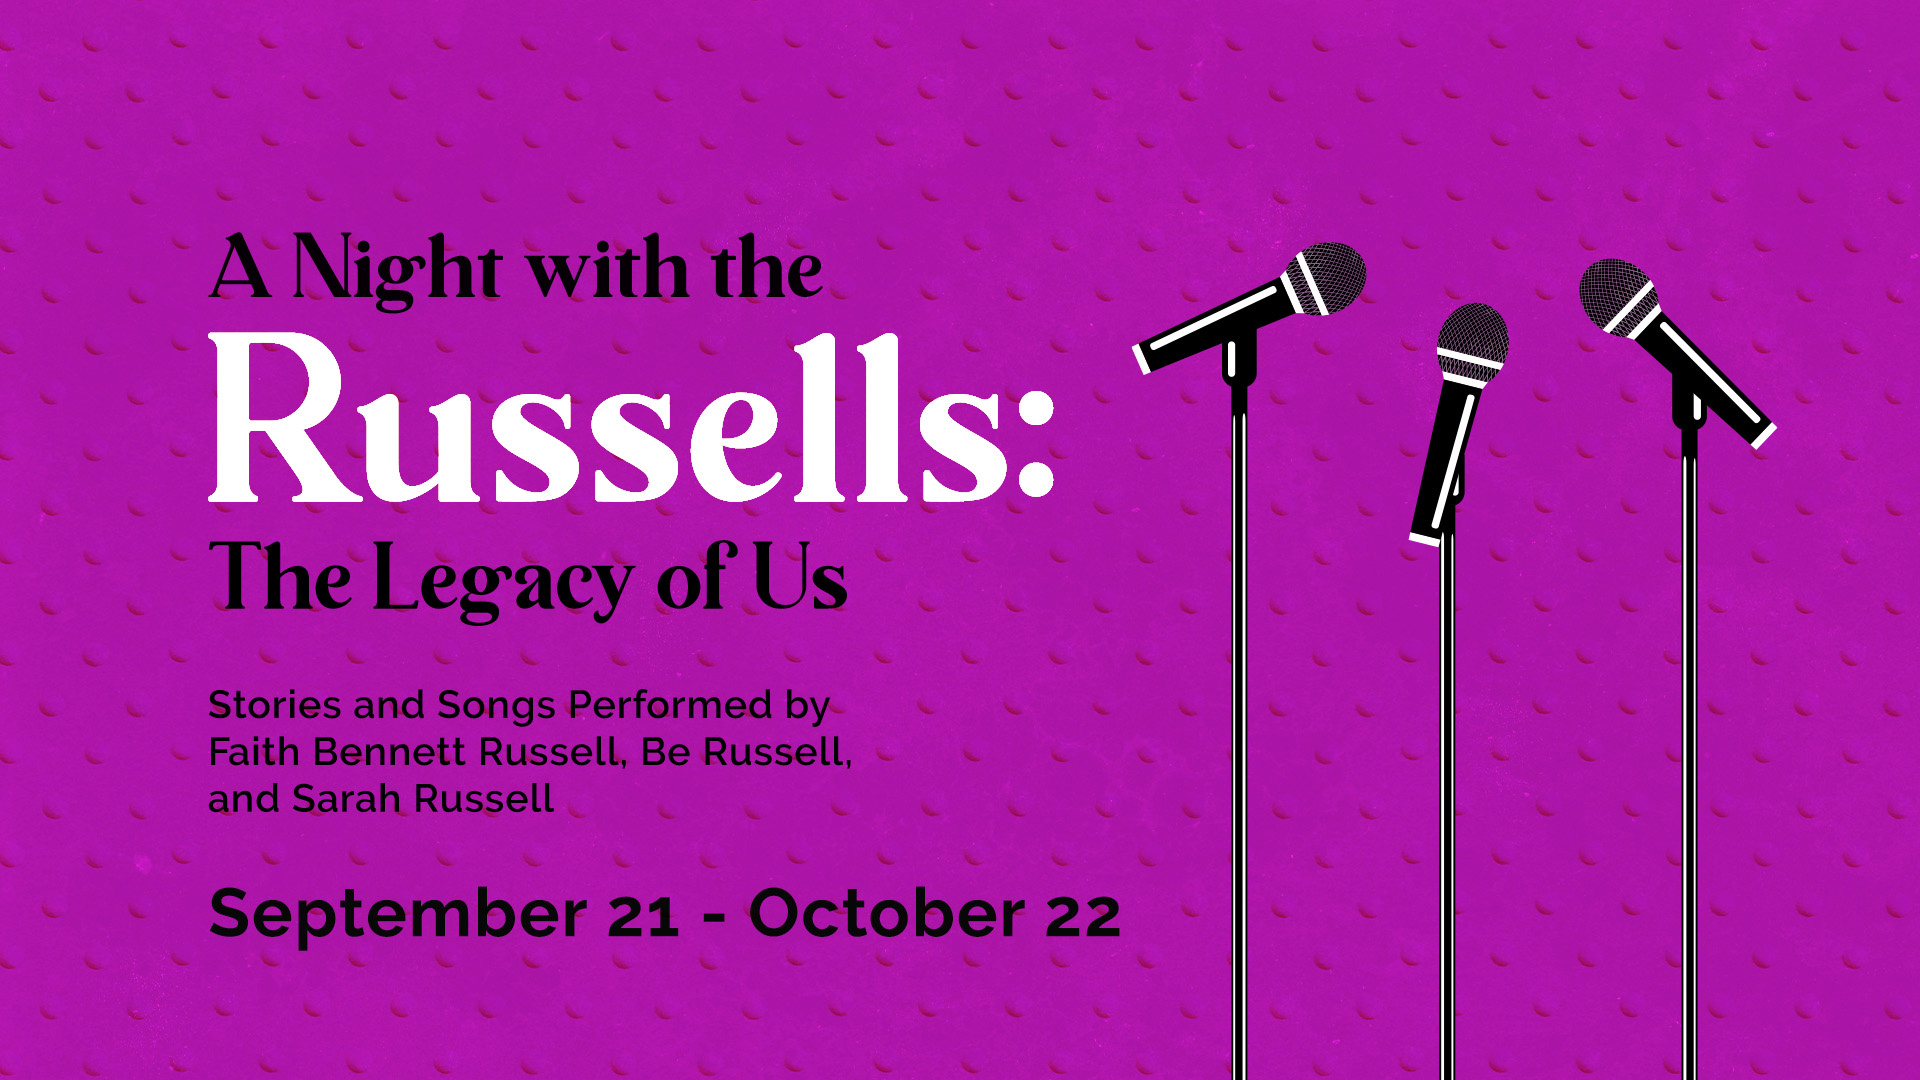 A Night with the Russells: The Legacy of Us